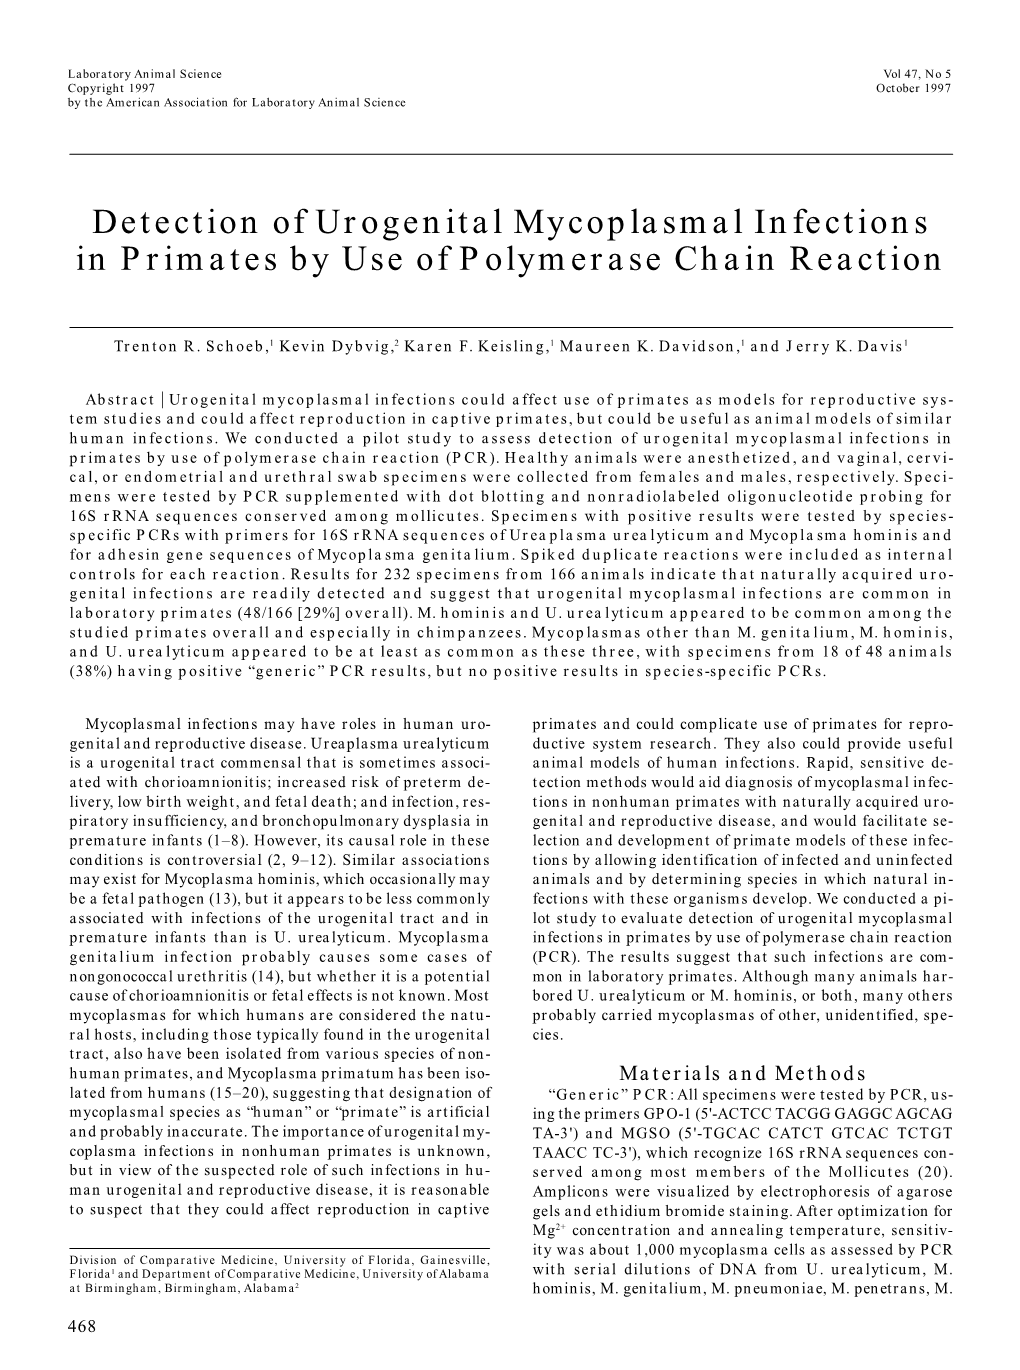 Detection of Urogenital Mycoplasmal Infections in Primates by Use of Polymerase Chain Reaction